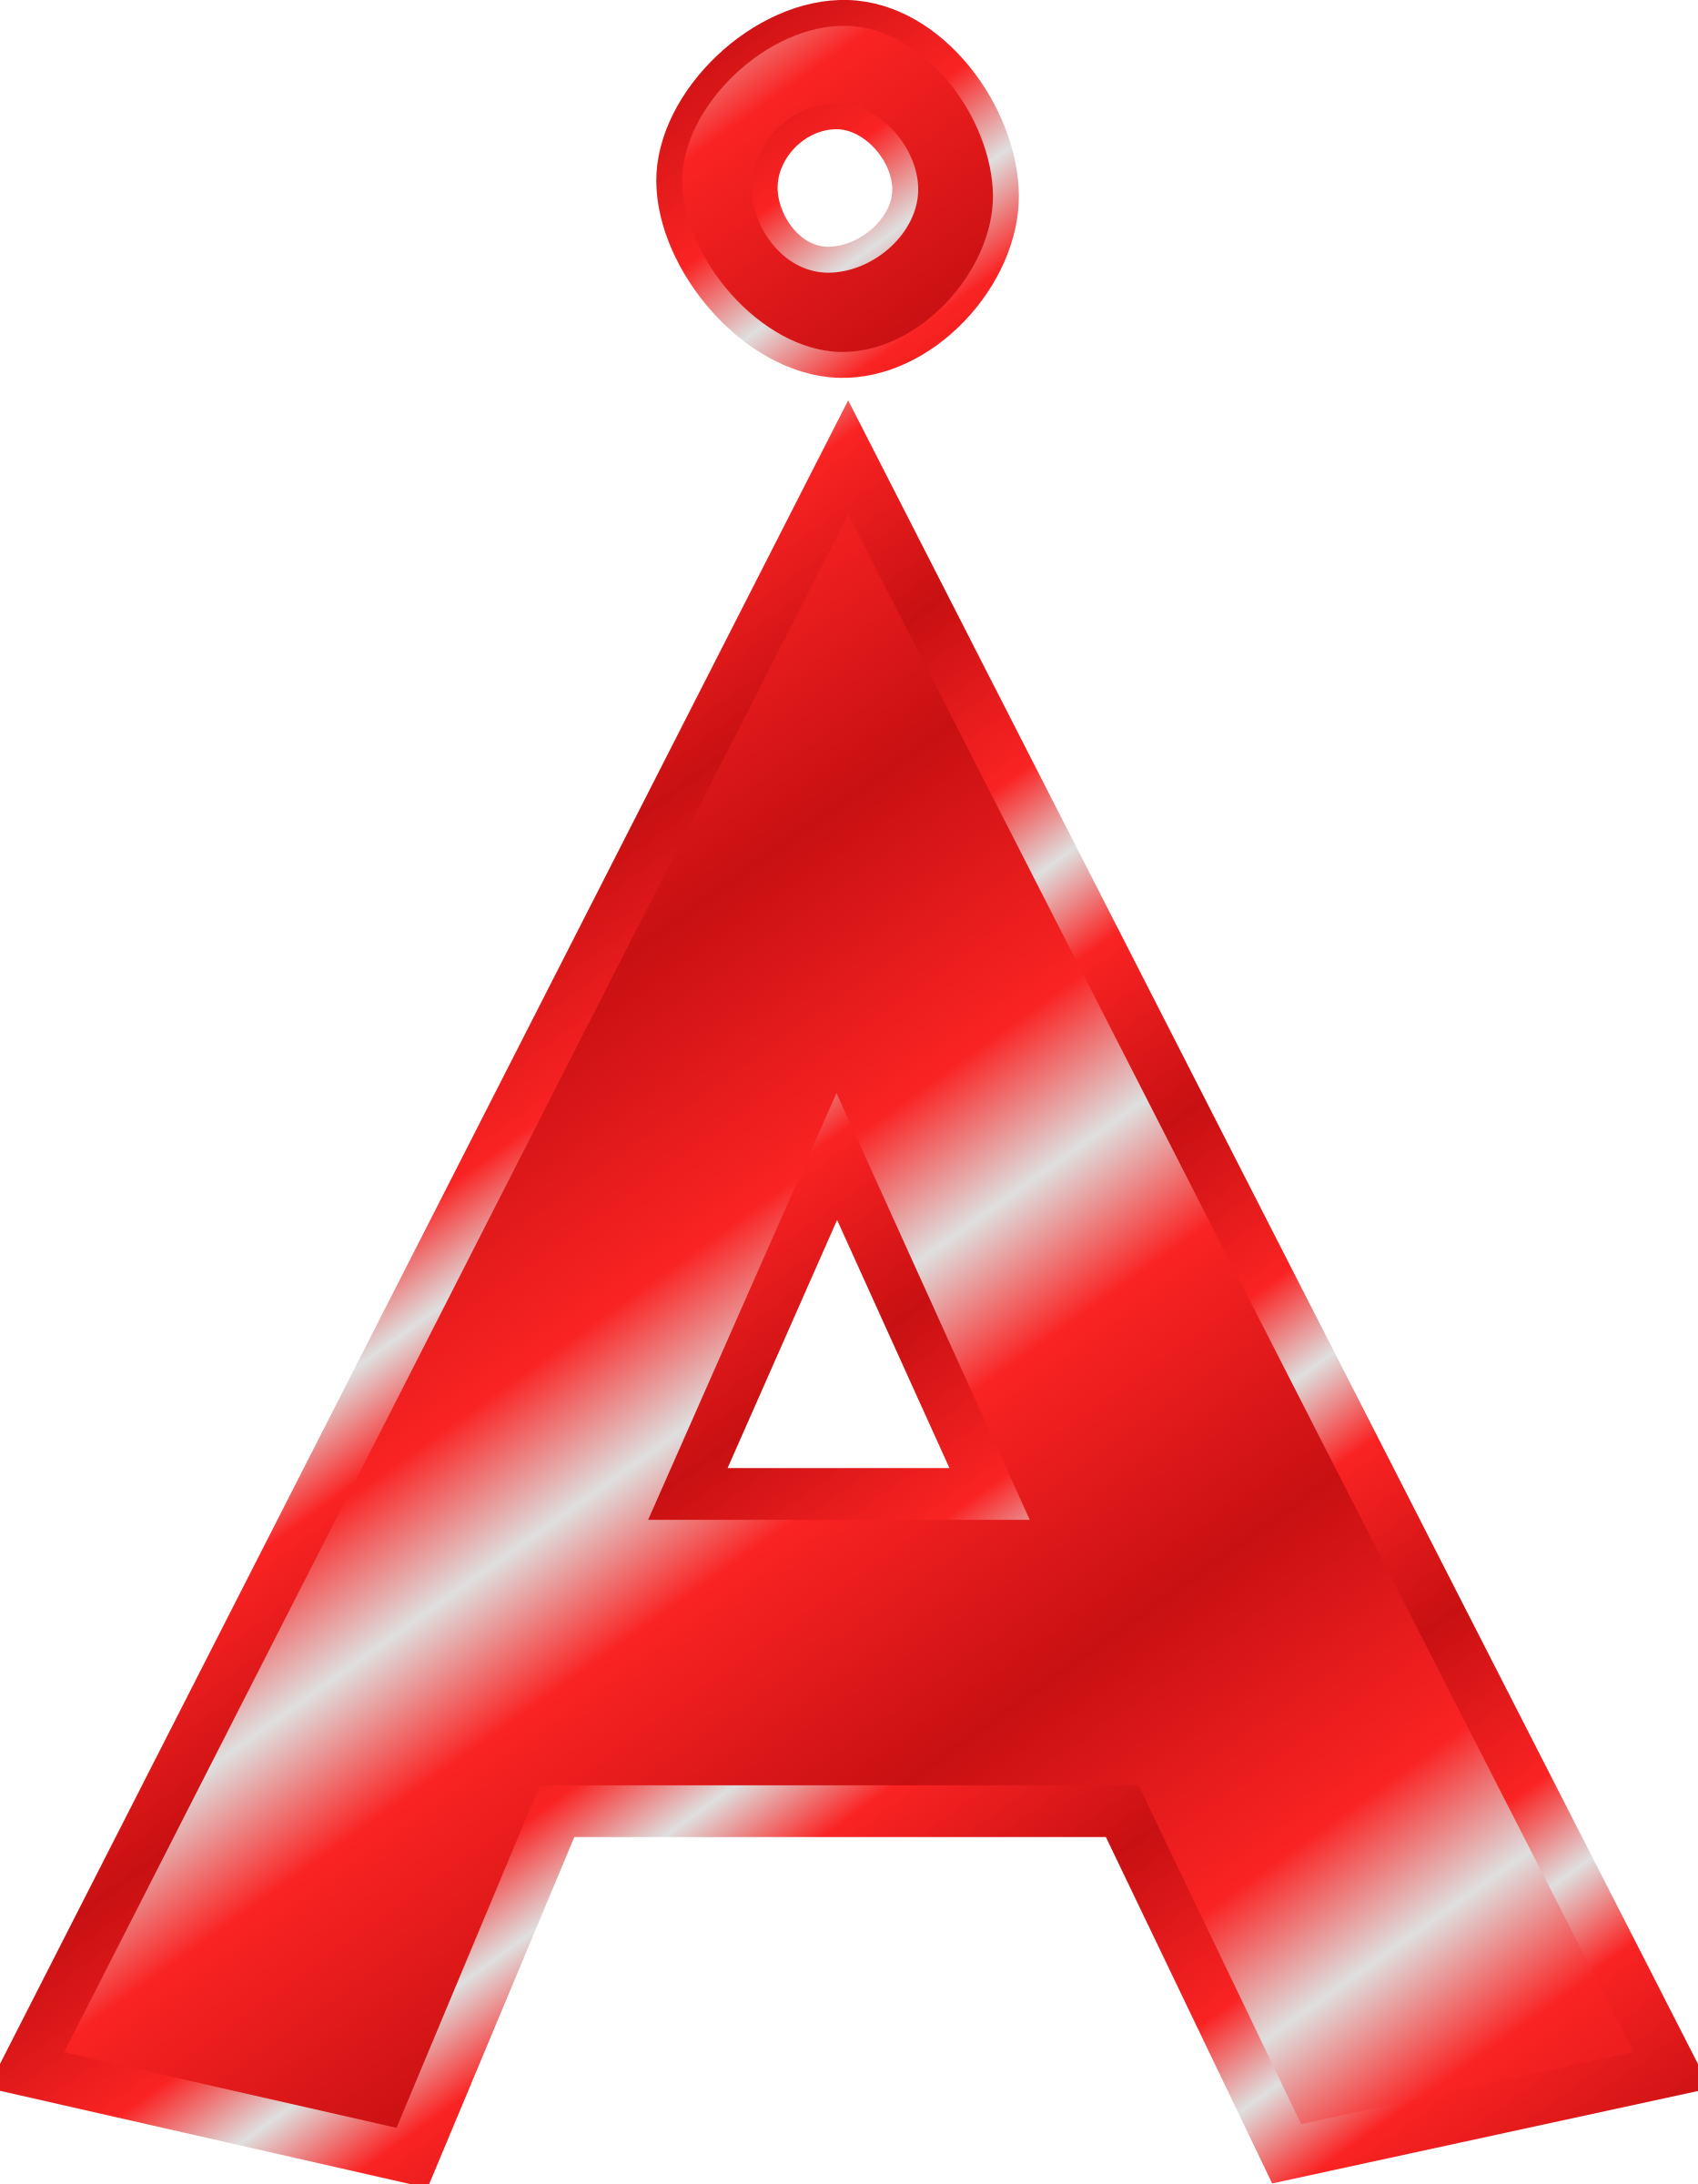 Clipart letters file. Letter a image group